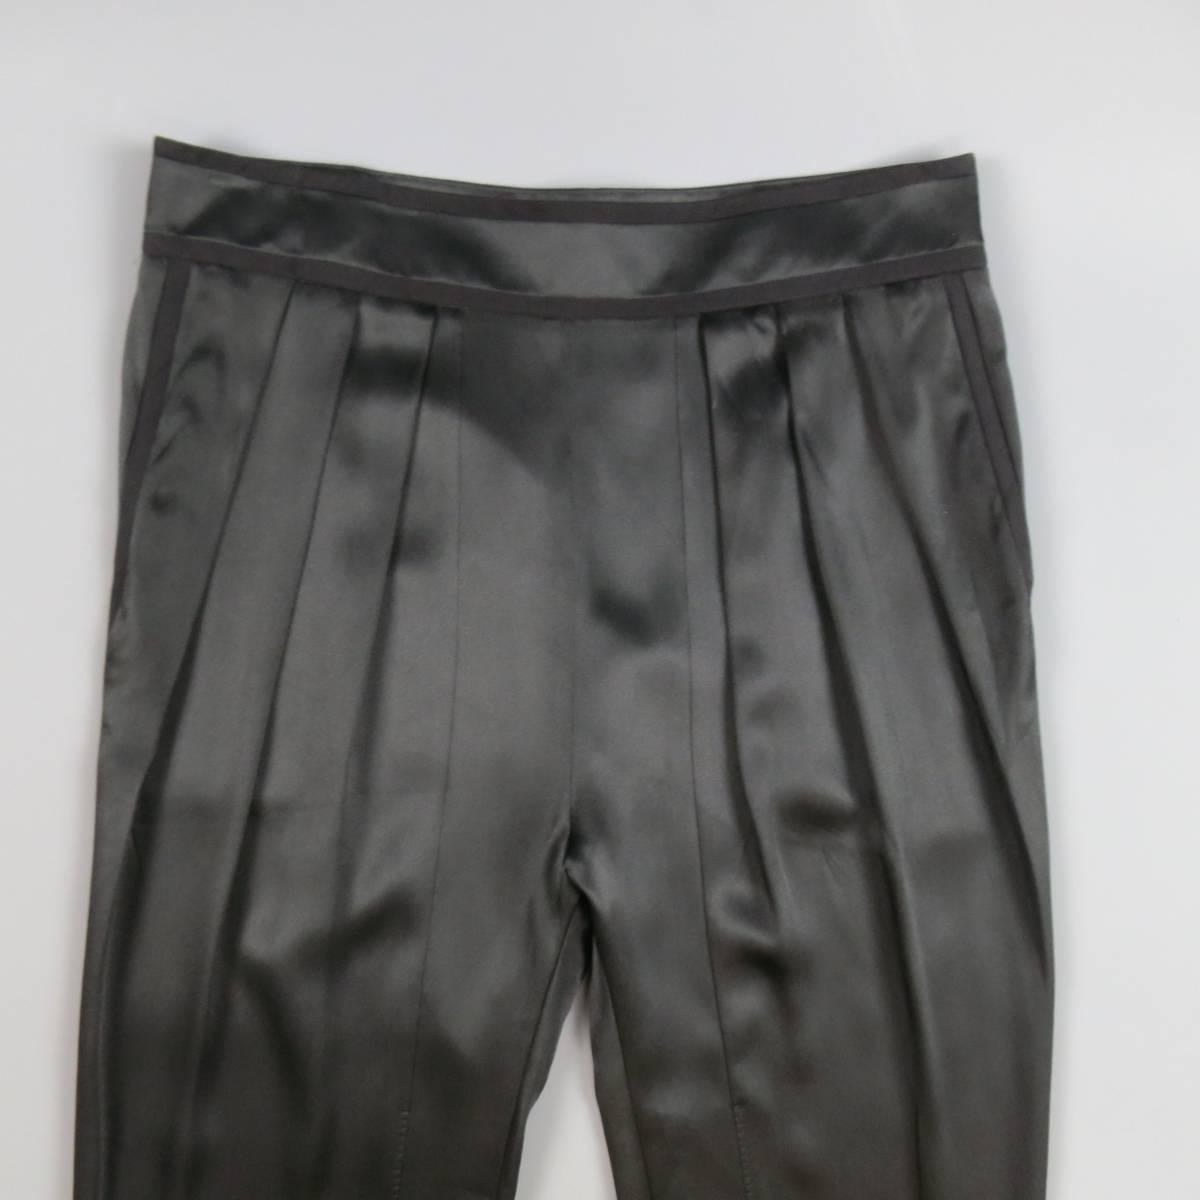 GIVENCHY back silk satin pants feature a pleated front, waistband with piping, riding pant details, drop crotch, and tapered leg with snap tab cuff. Made in Italy.
 
Excellent Pre-Owned Condition.
Marked: 44
 
Measurements:
 
Waist: 35 In.
Rise: